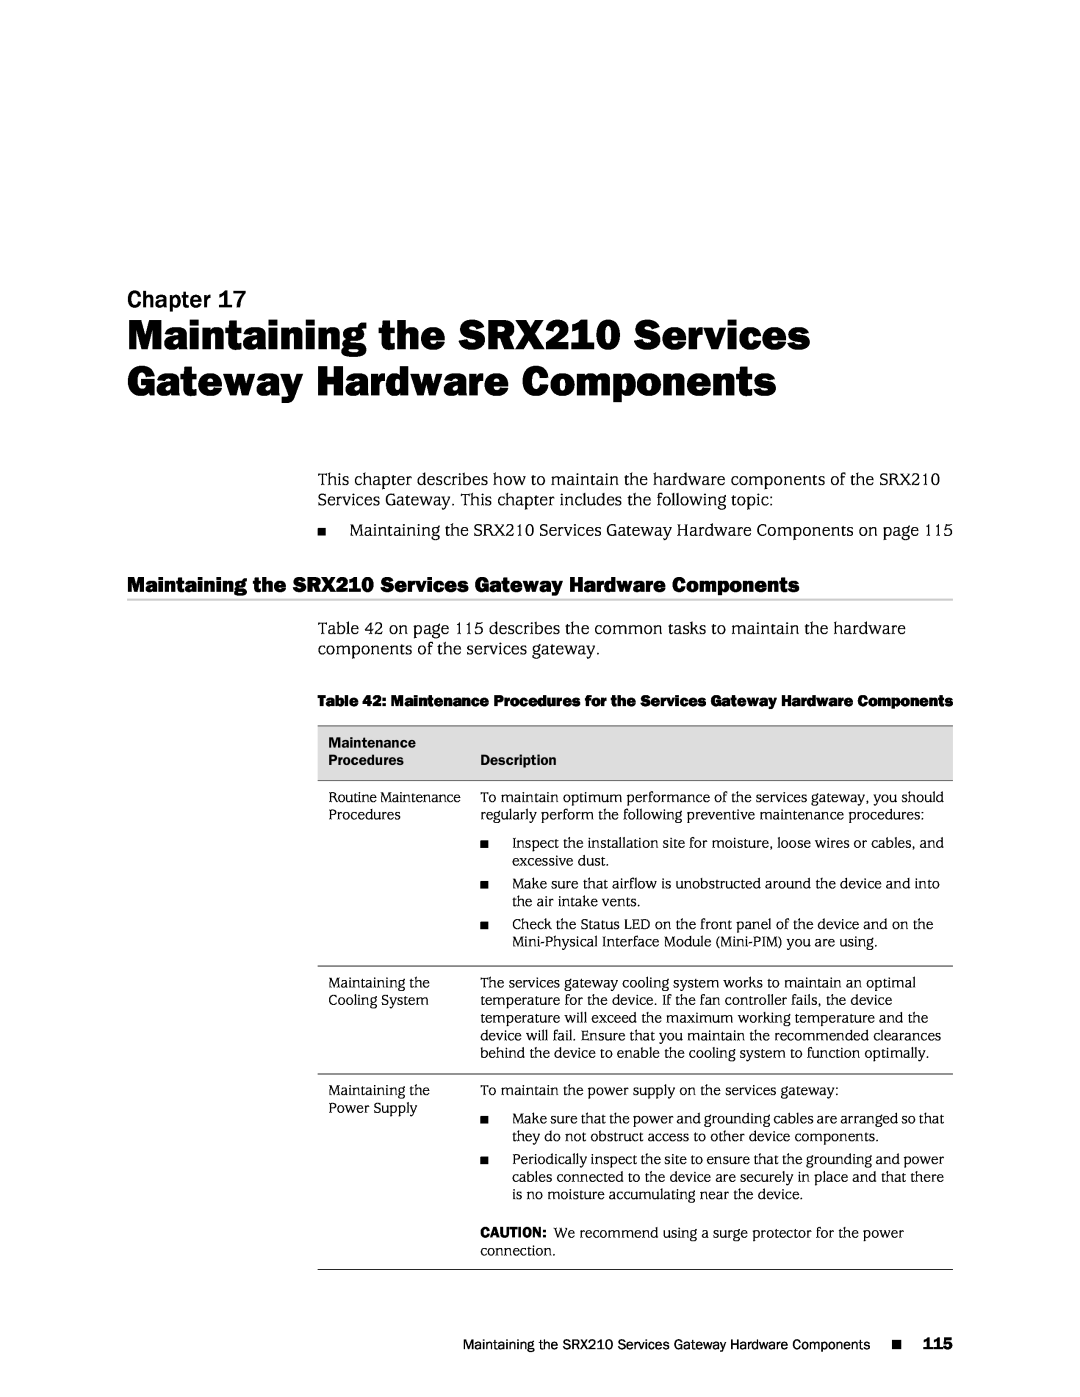 Juniper Networks SRX 210 manual Maintaining the SRX210 Services Gateway Hardware Components, Chapter 